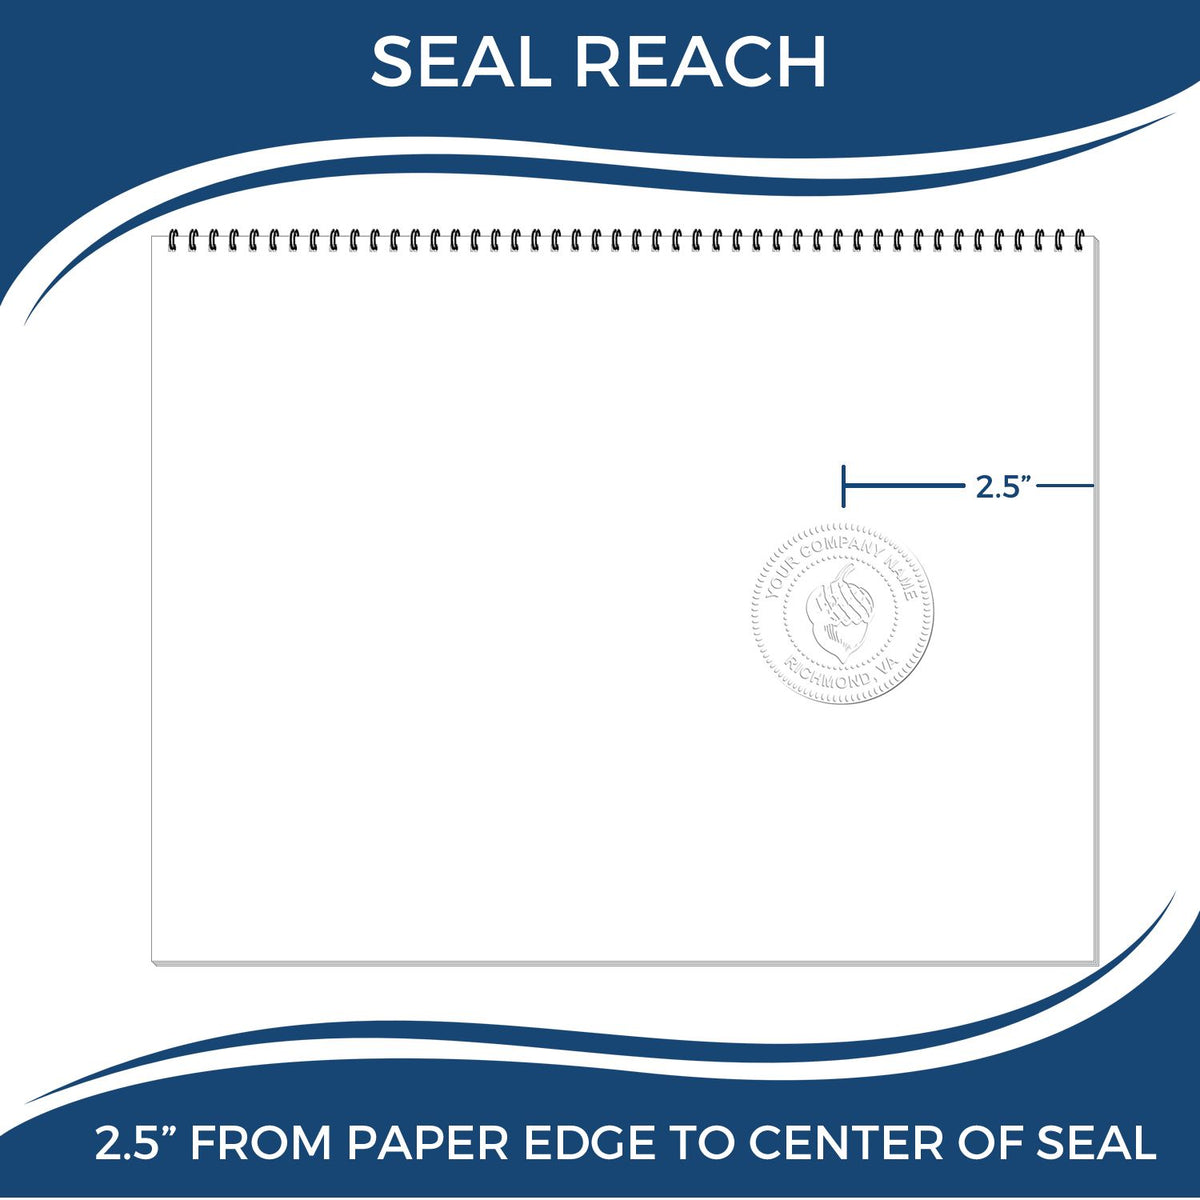 An infographic showing the seal reach which is represented by a ruler and a miniature seal image of the State of North Dakota Long Reach Architectural Embossing Seal